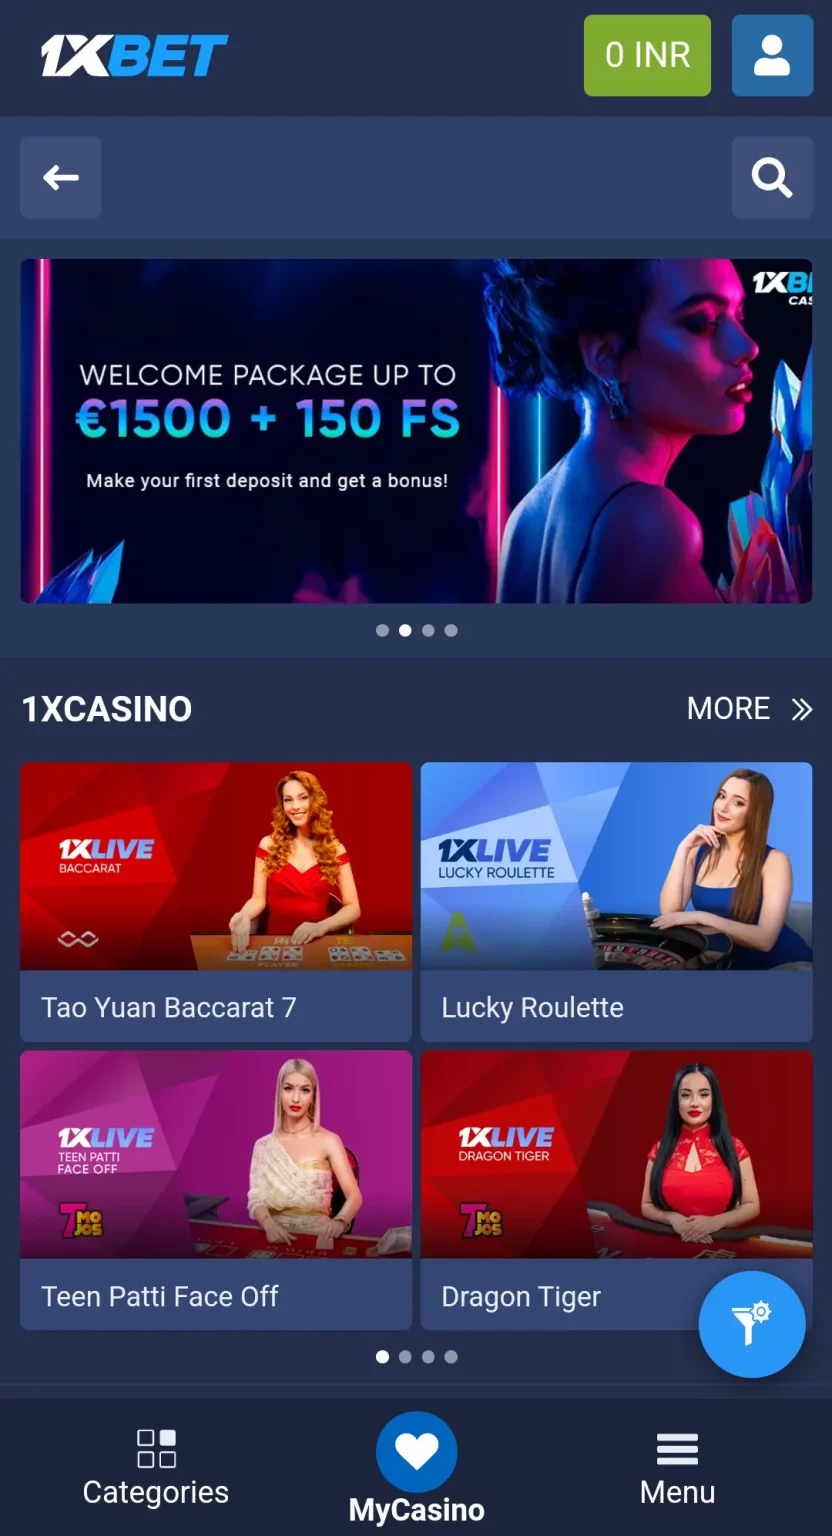 Live casino at 1xbet